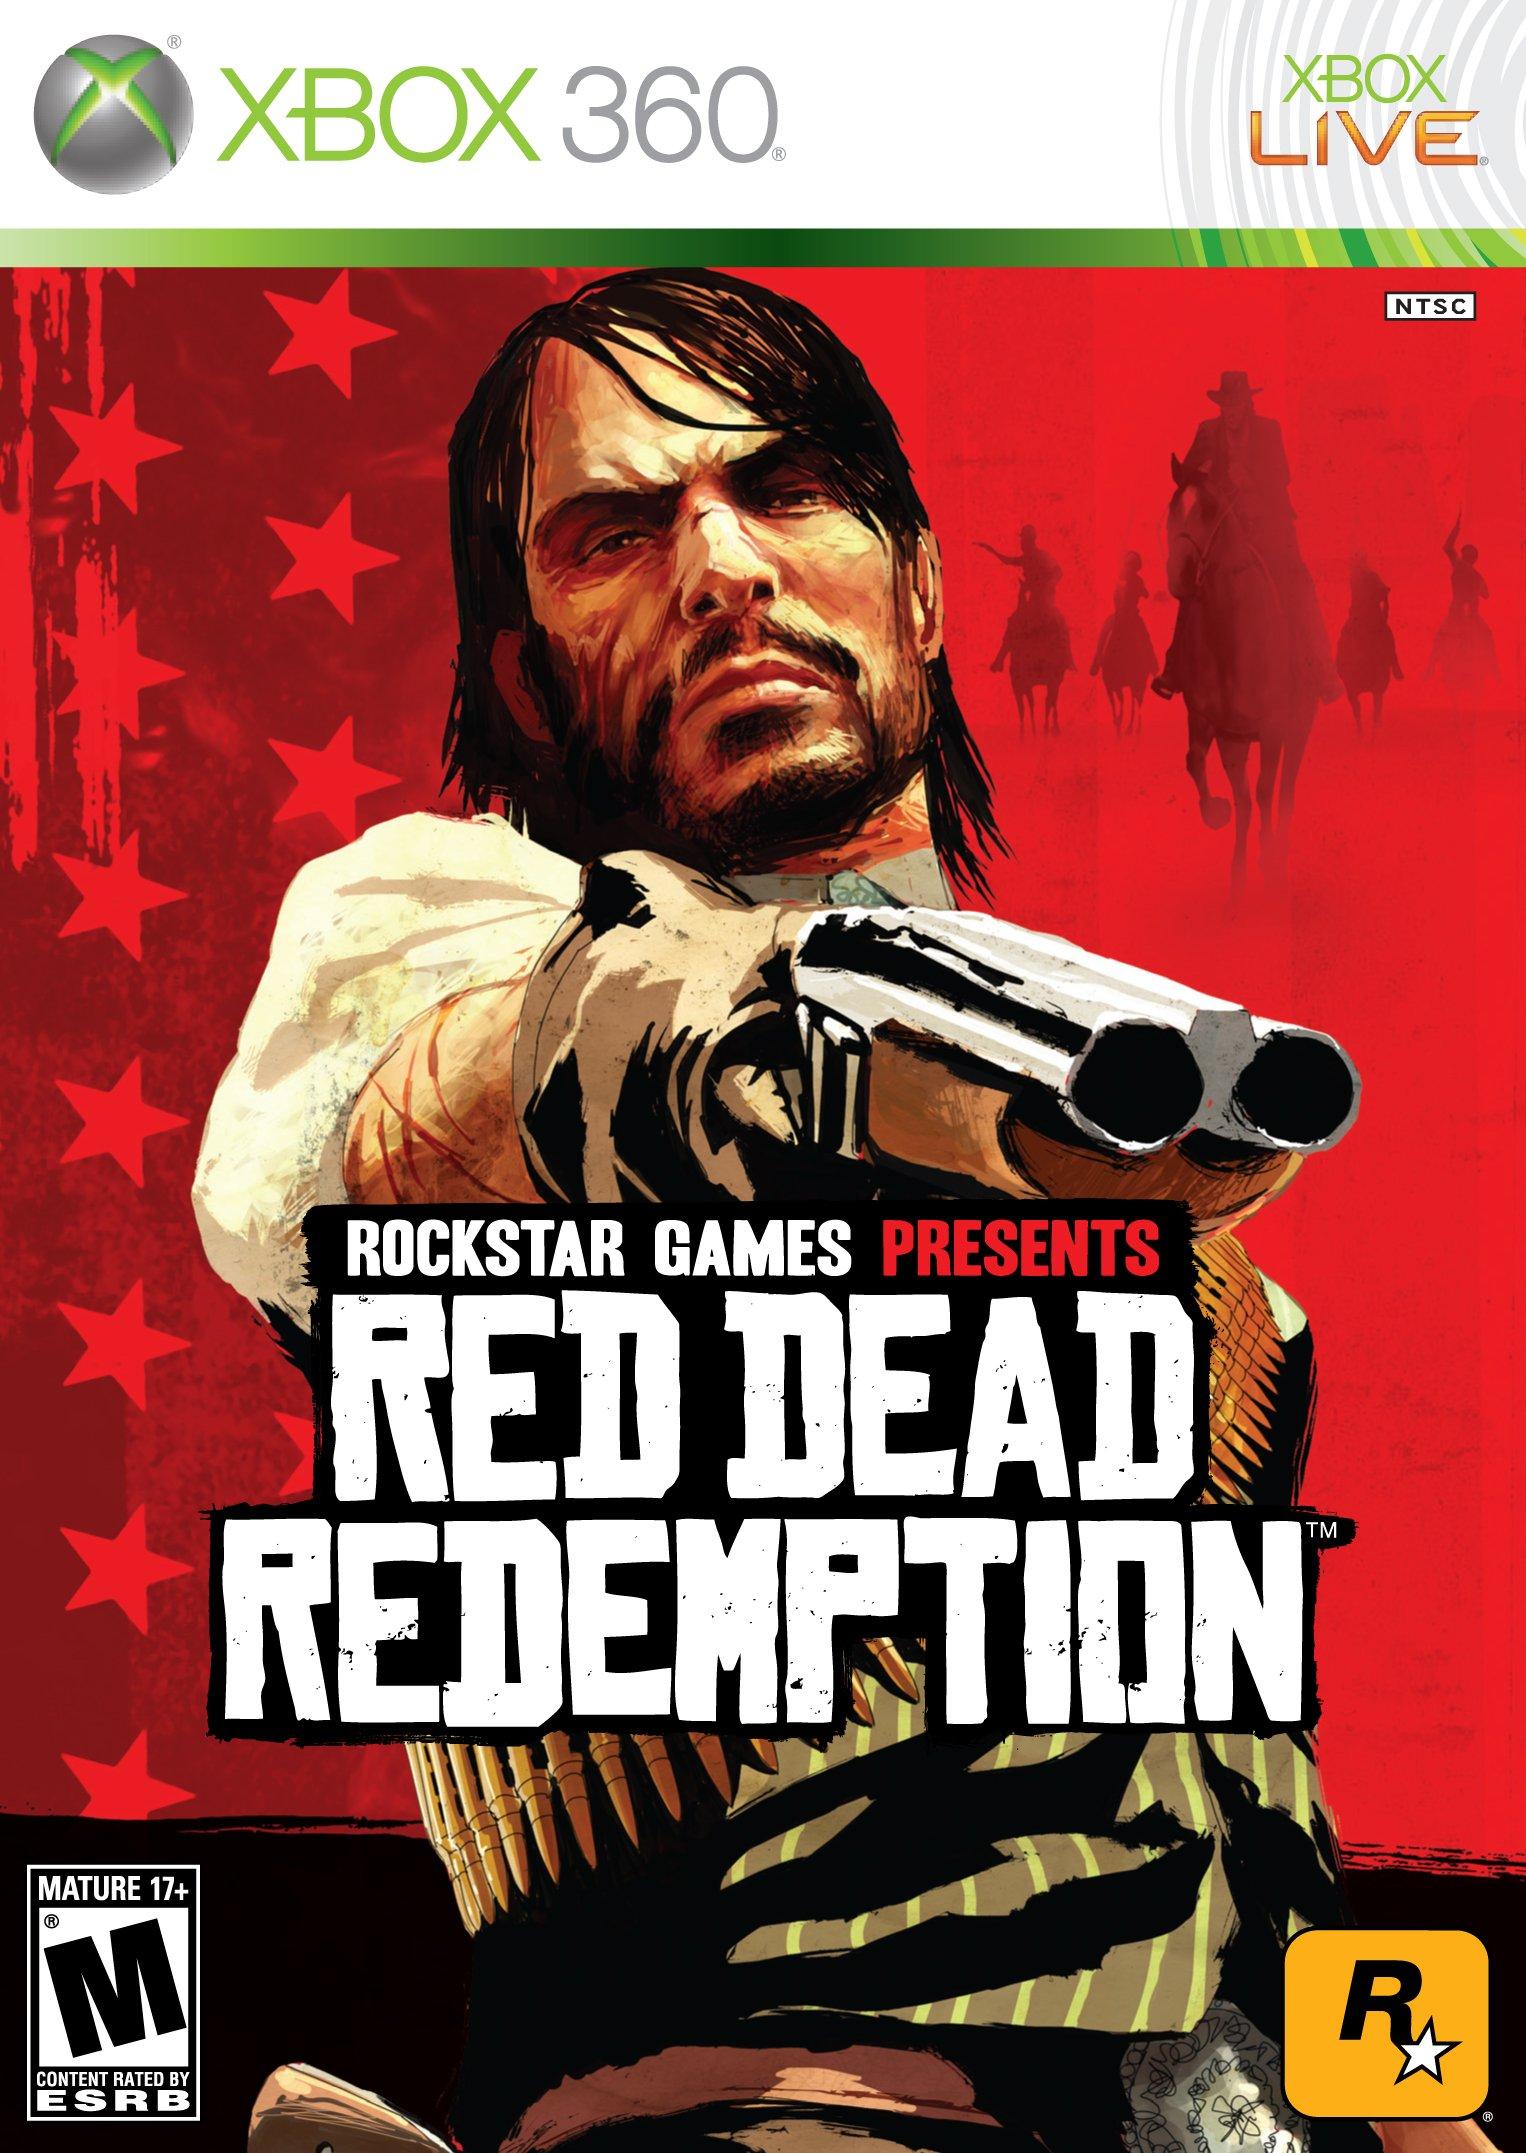 Train Anthology appeal Red Dead Redemption - Xbox 360